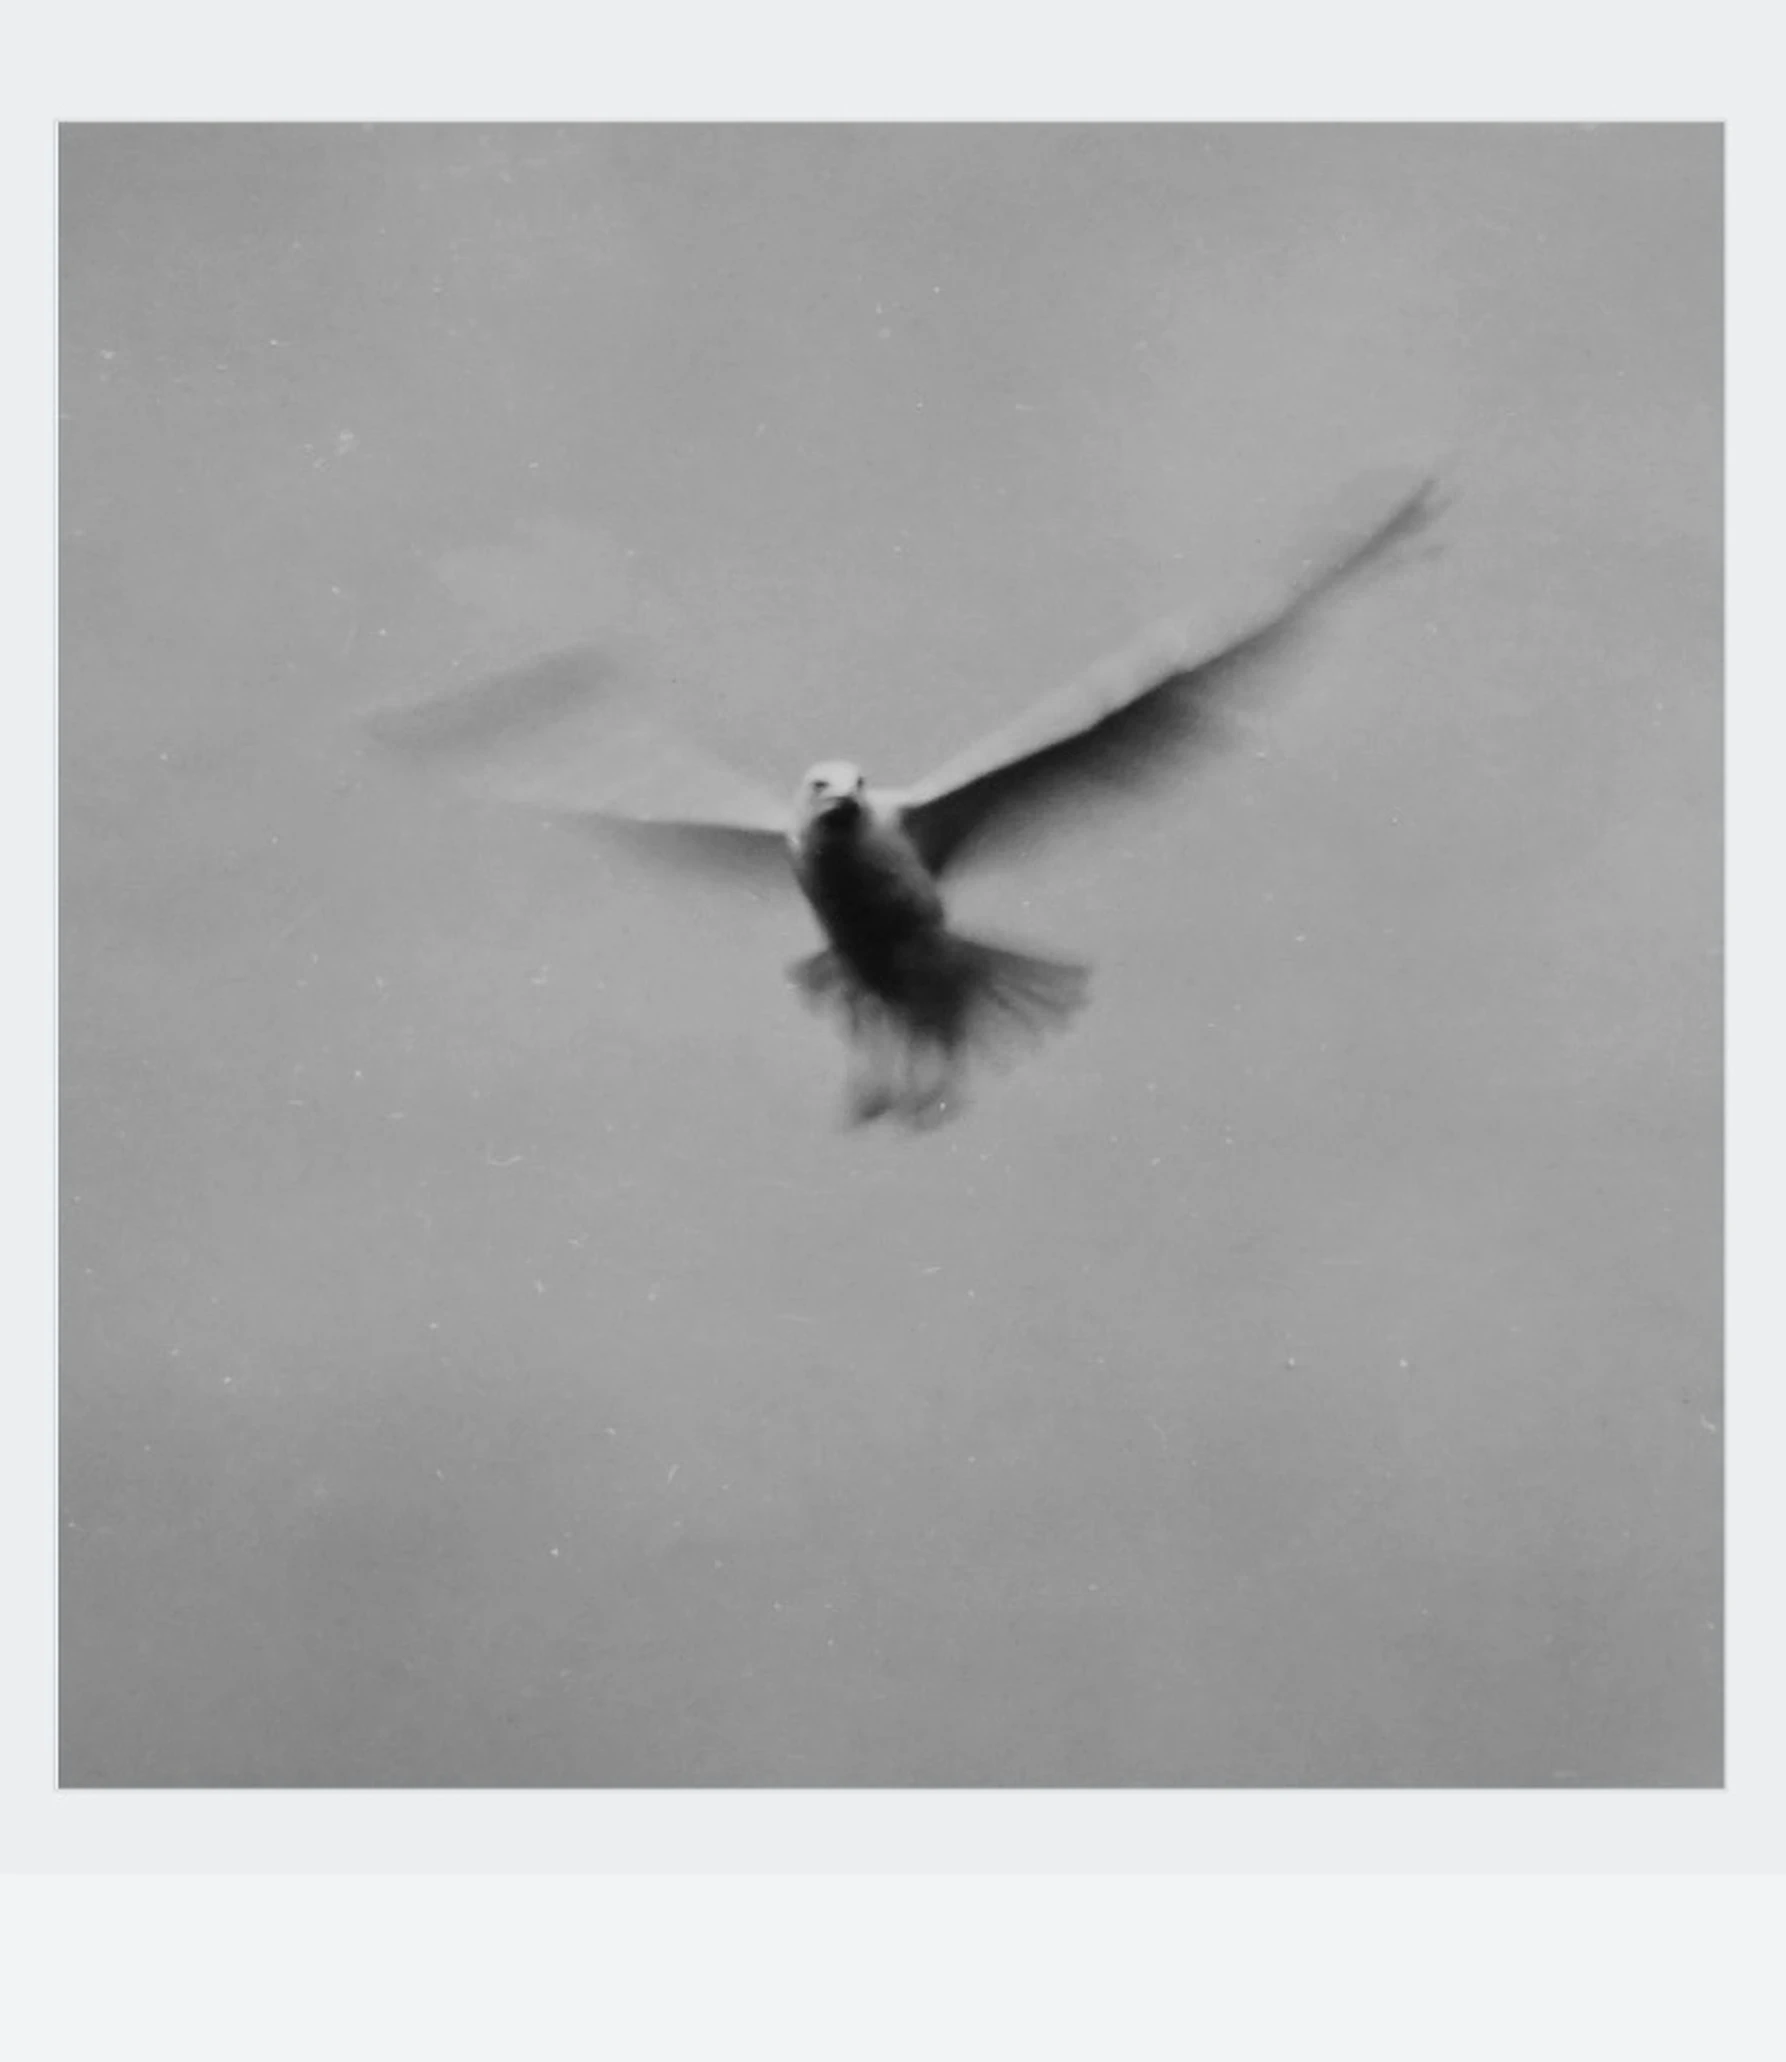 a black and white photo of a bird in flight, a black and white photo, by Shinji Aramaki, alec soth : : love, dove, album cover art, style of hiroshi sugimoto